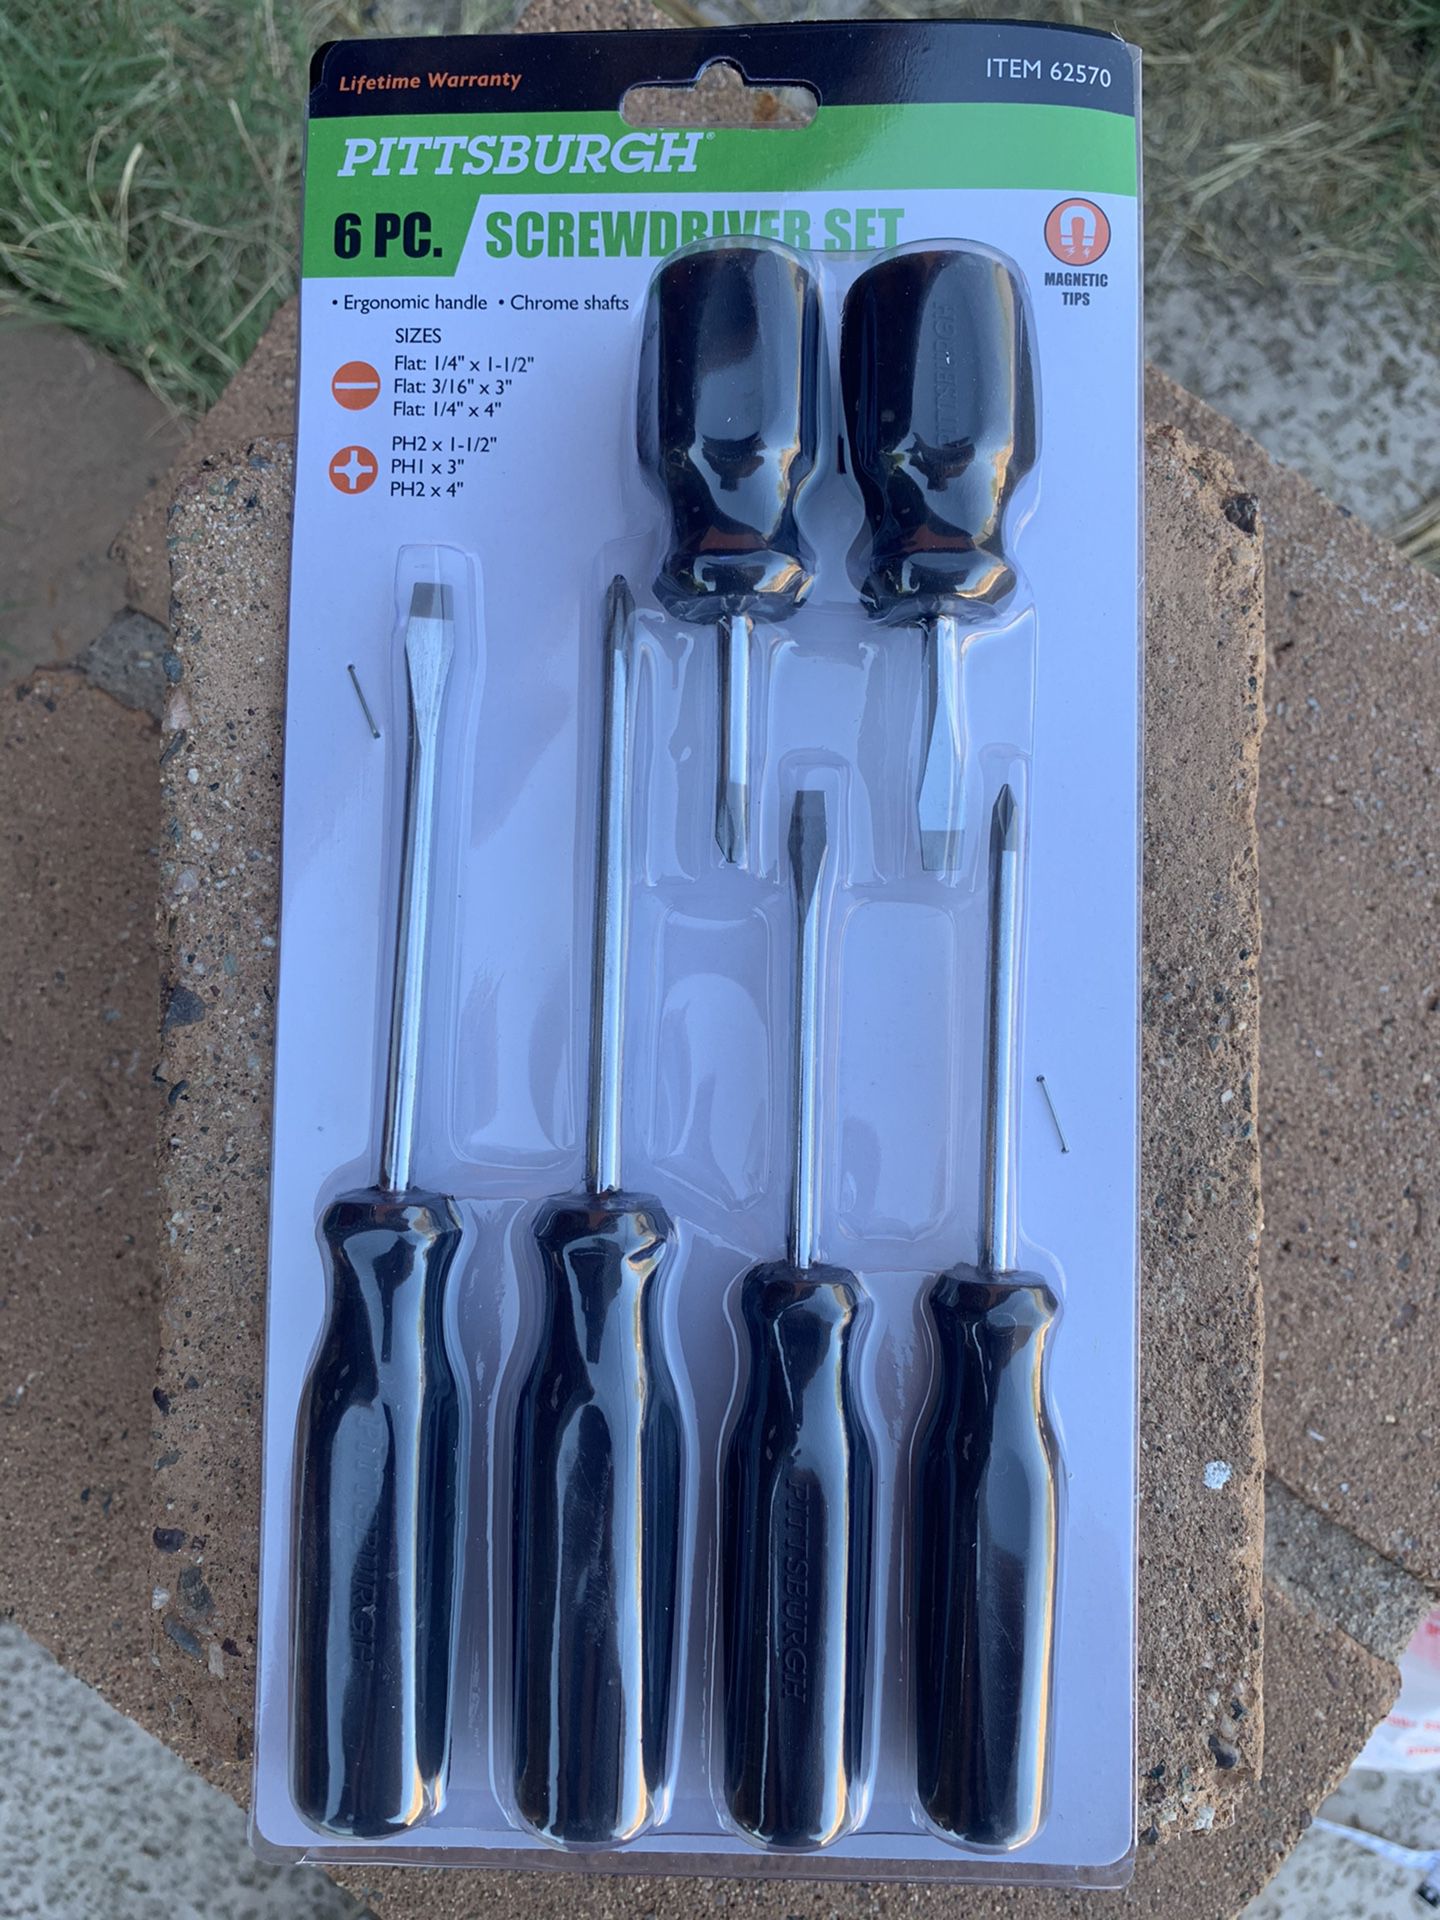 Screwdriver set from Pittsburgh